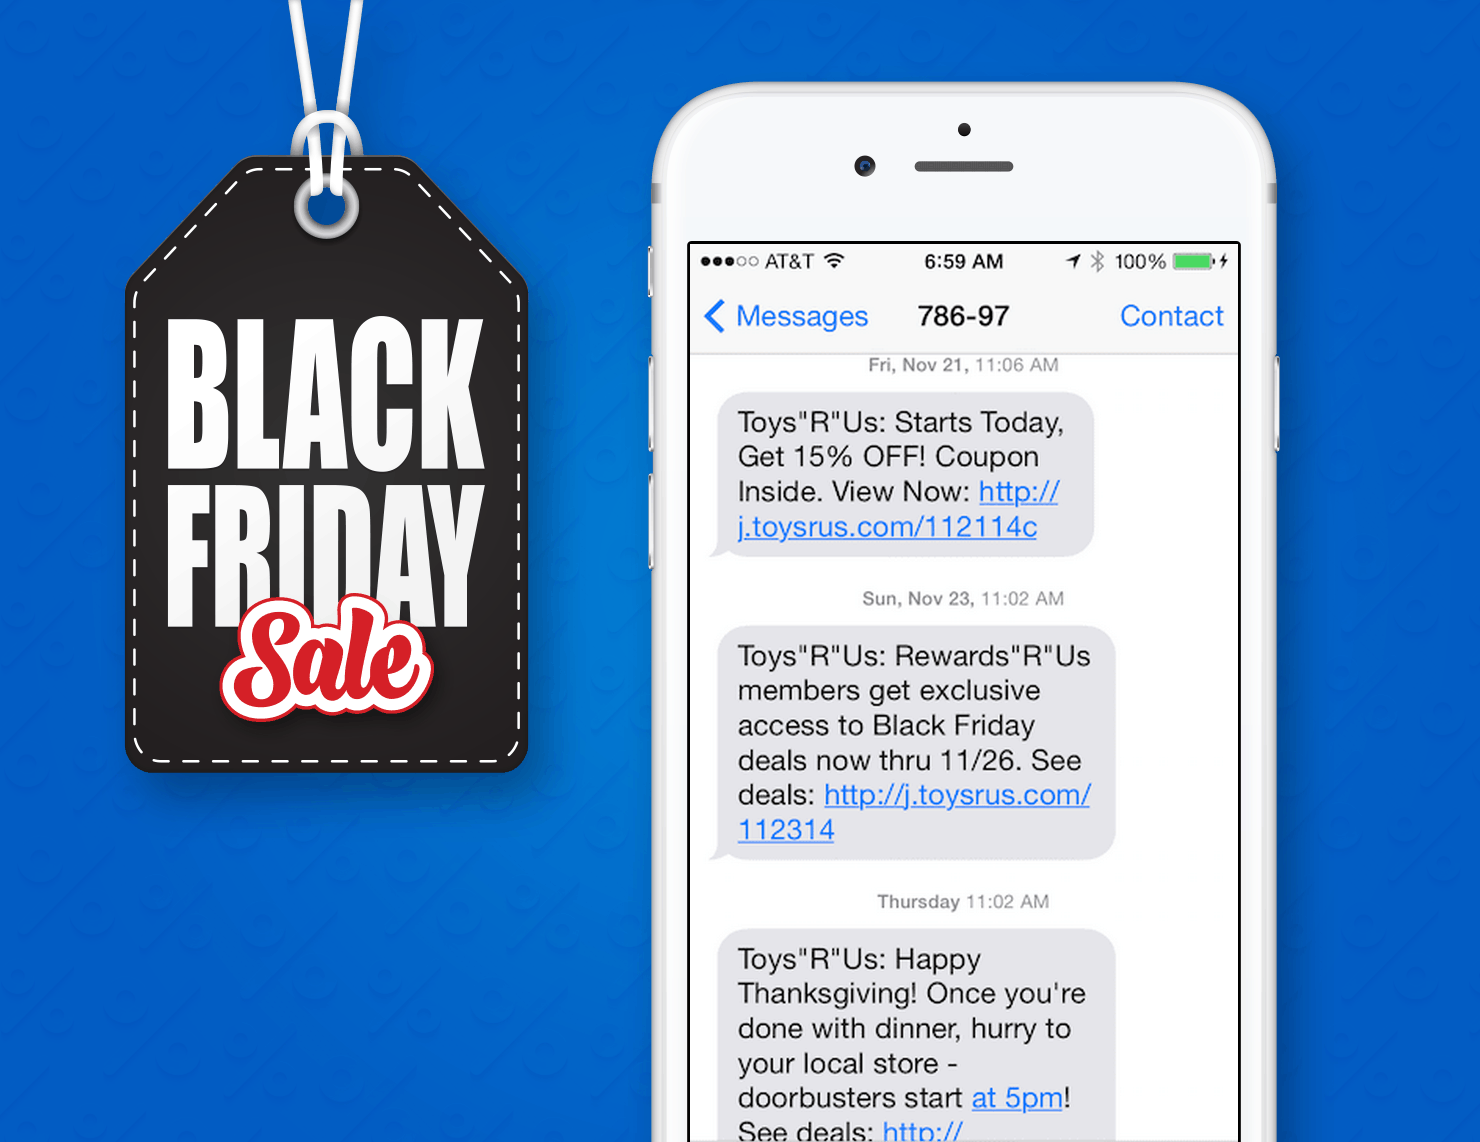 Black Friday SMS Marketing Example From Toys-R-Us